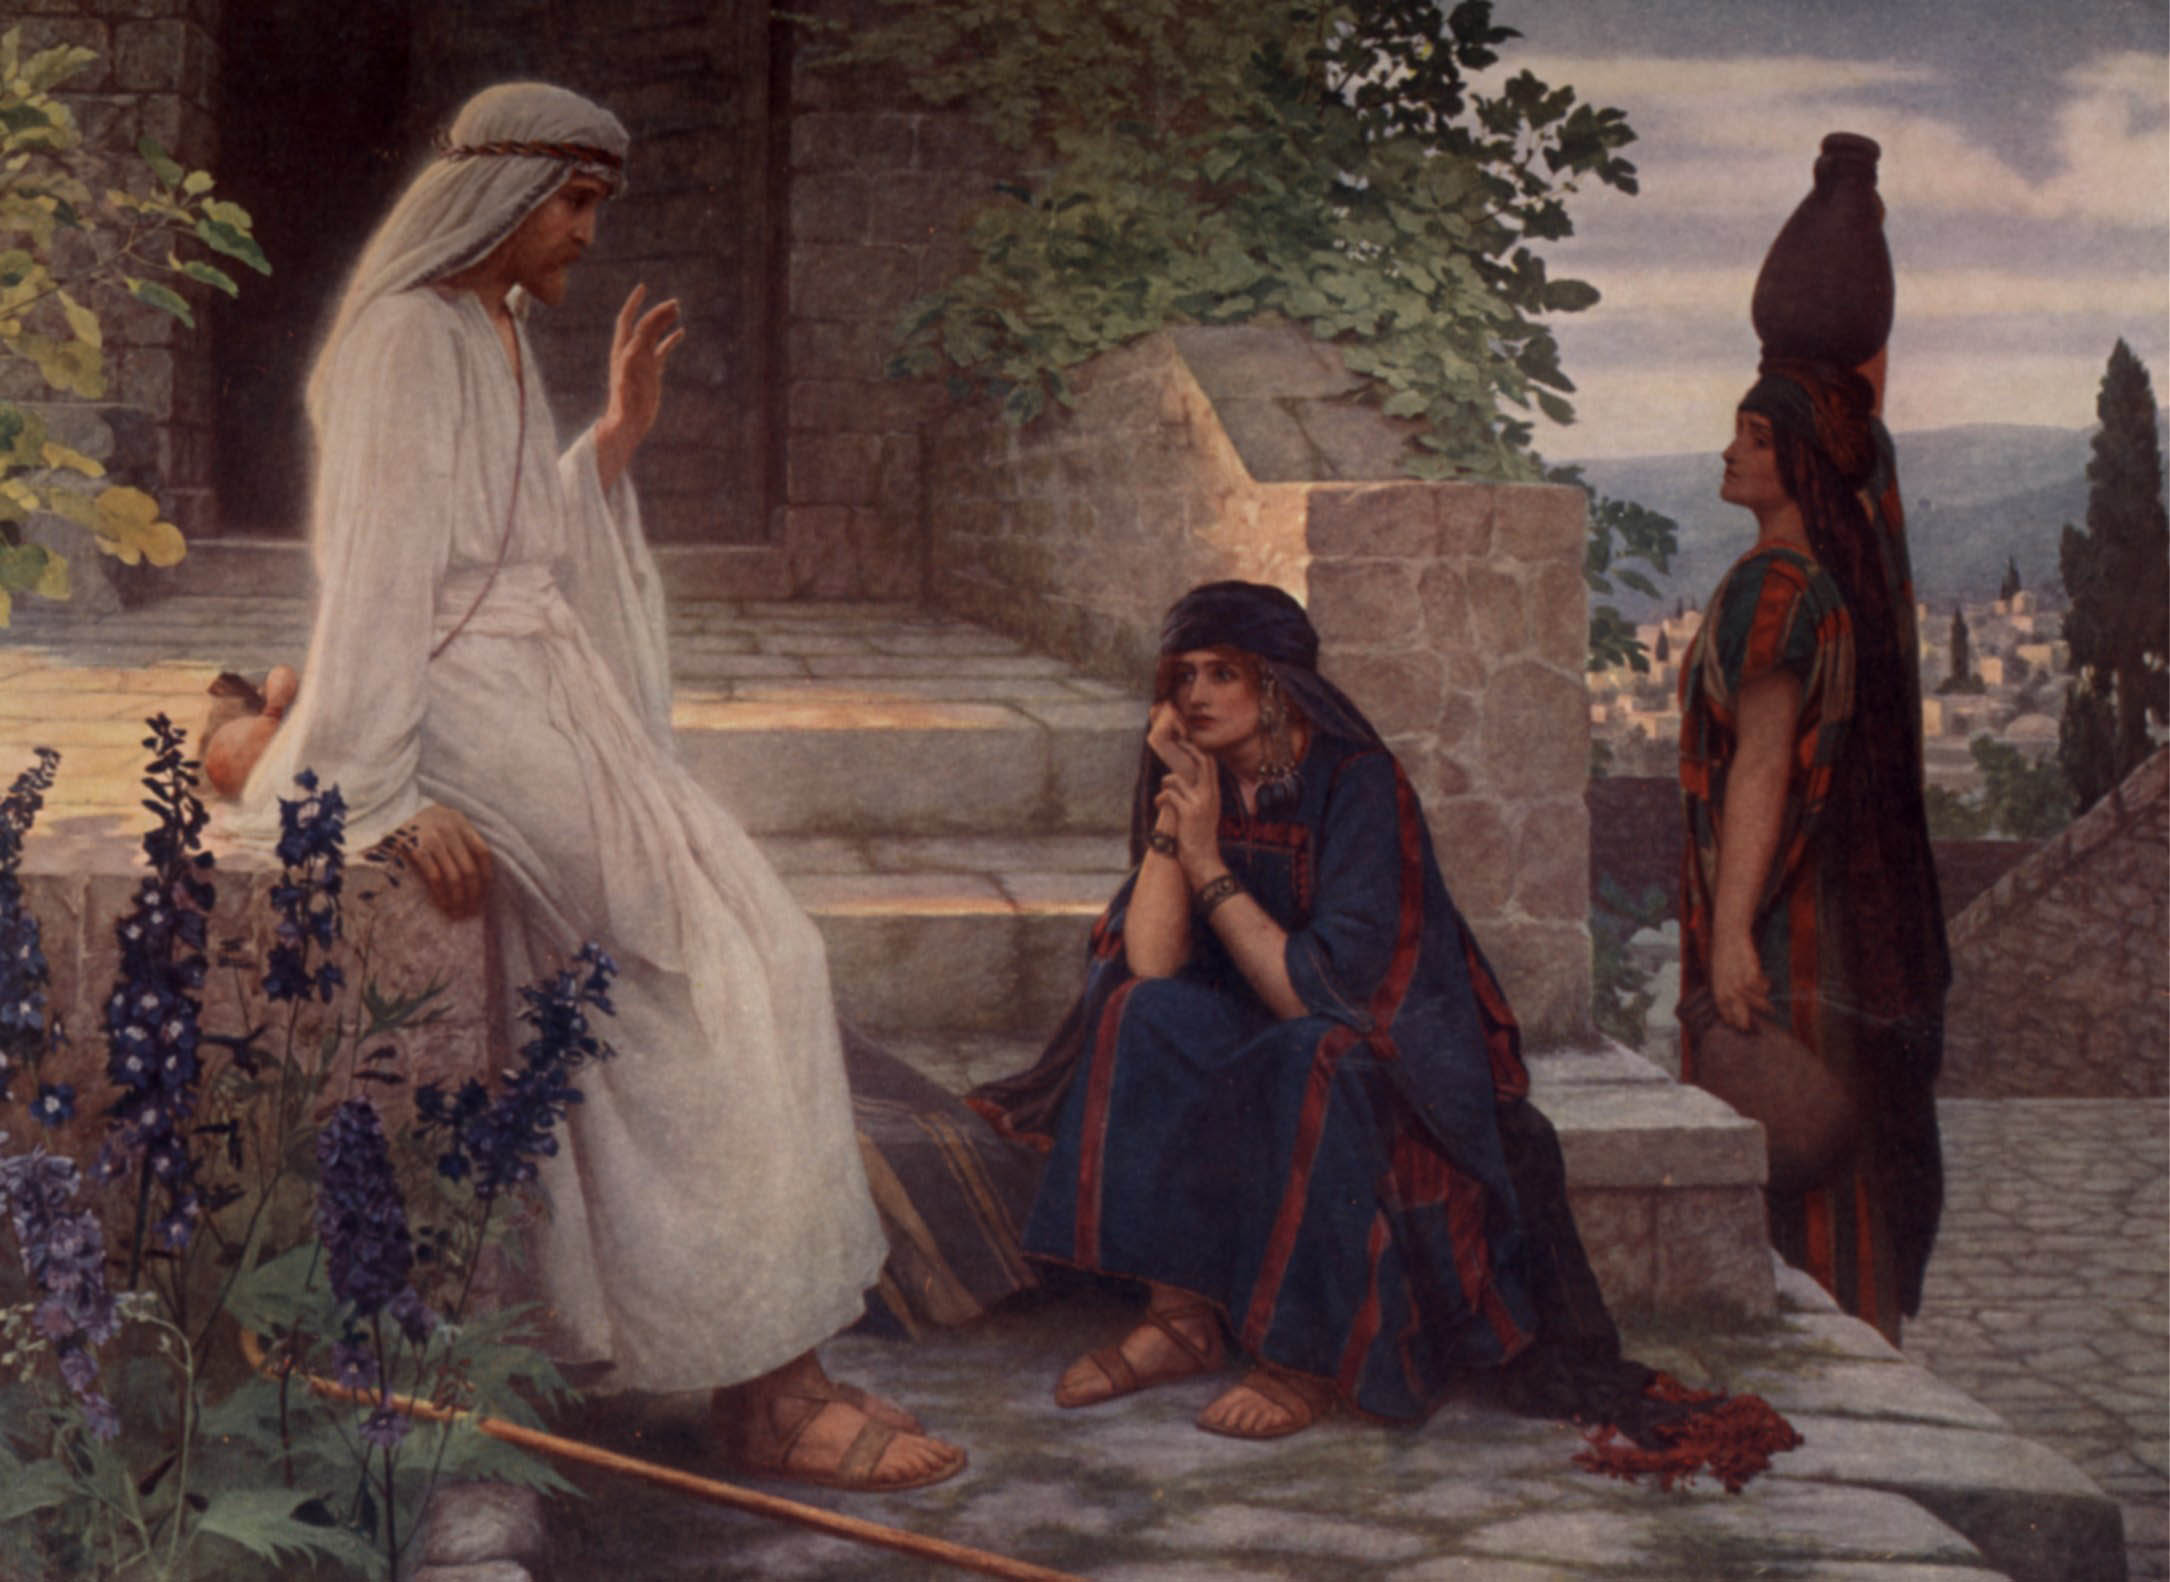 Home of Bethany by Herbert Gustave Schmalz